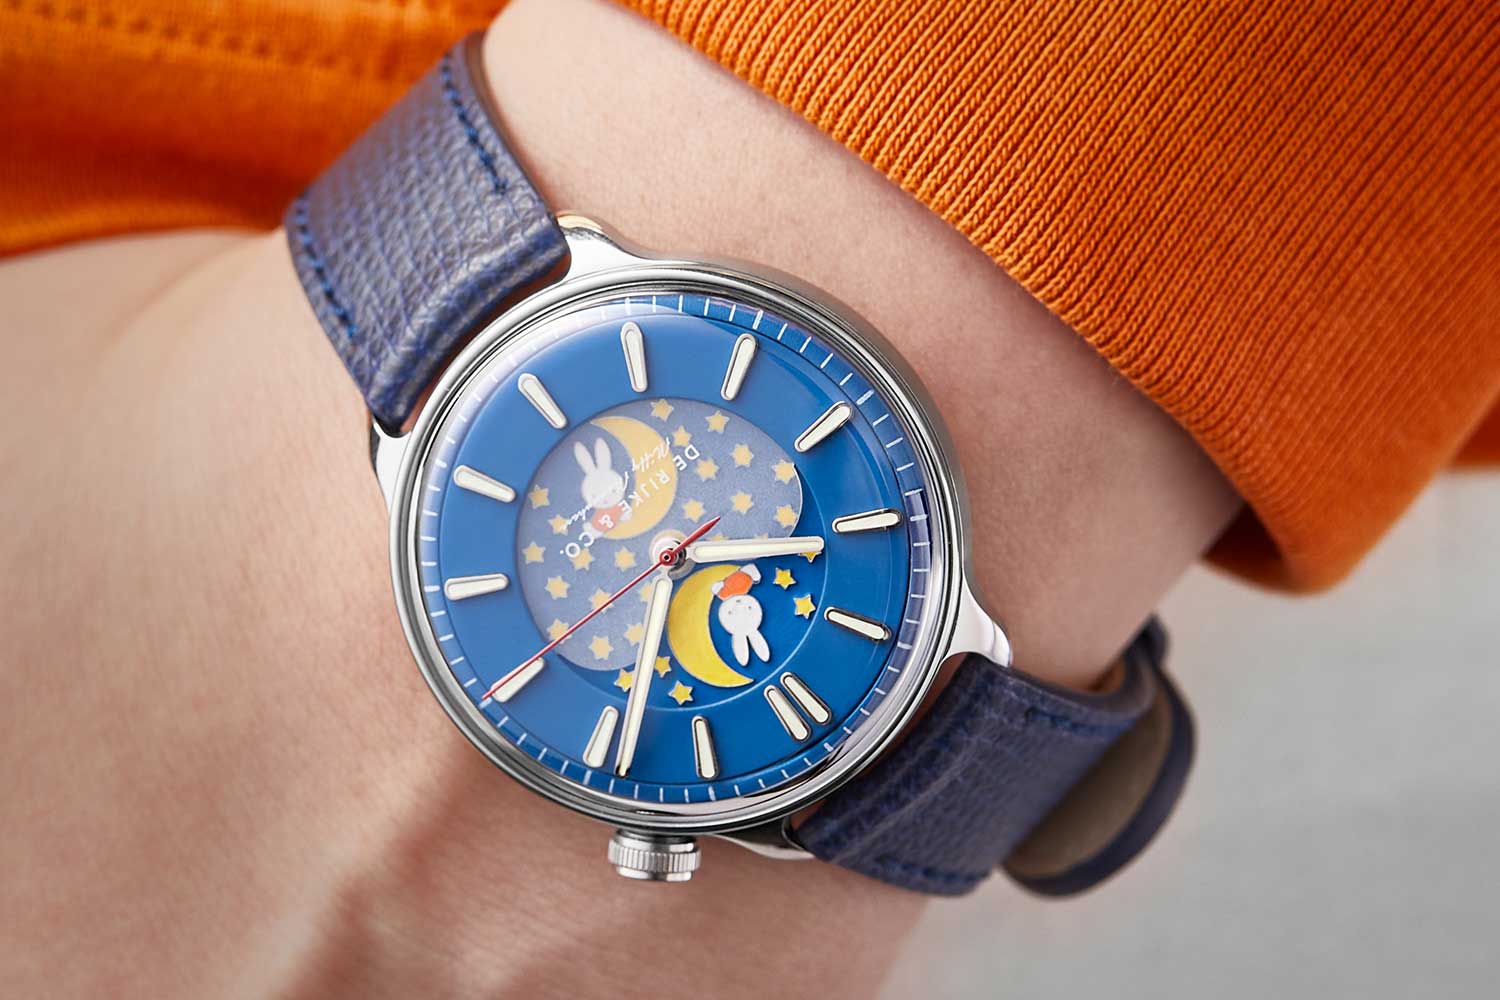 Harking to Miffy’s role as a bedtime story character for children, Miffy appears in the watch on a specially designed moonphase indicator.